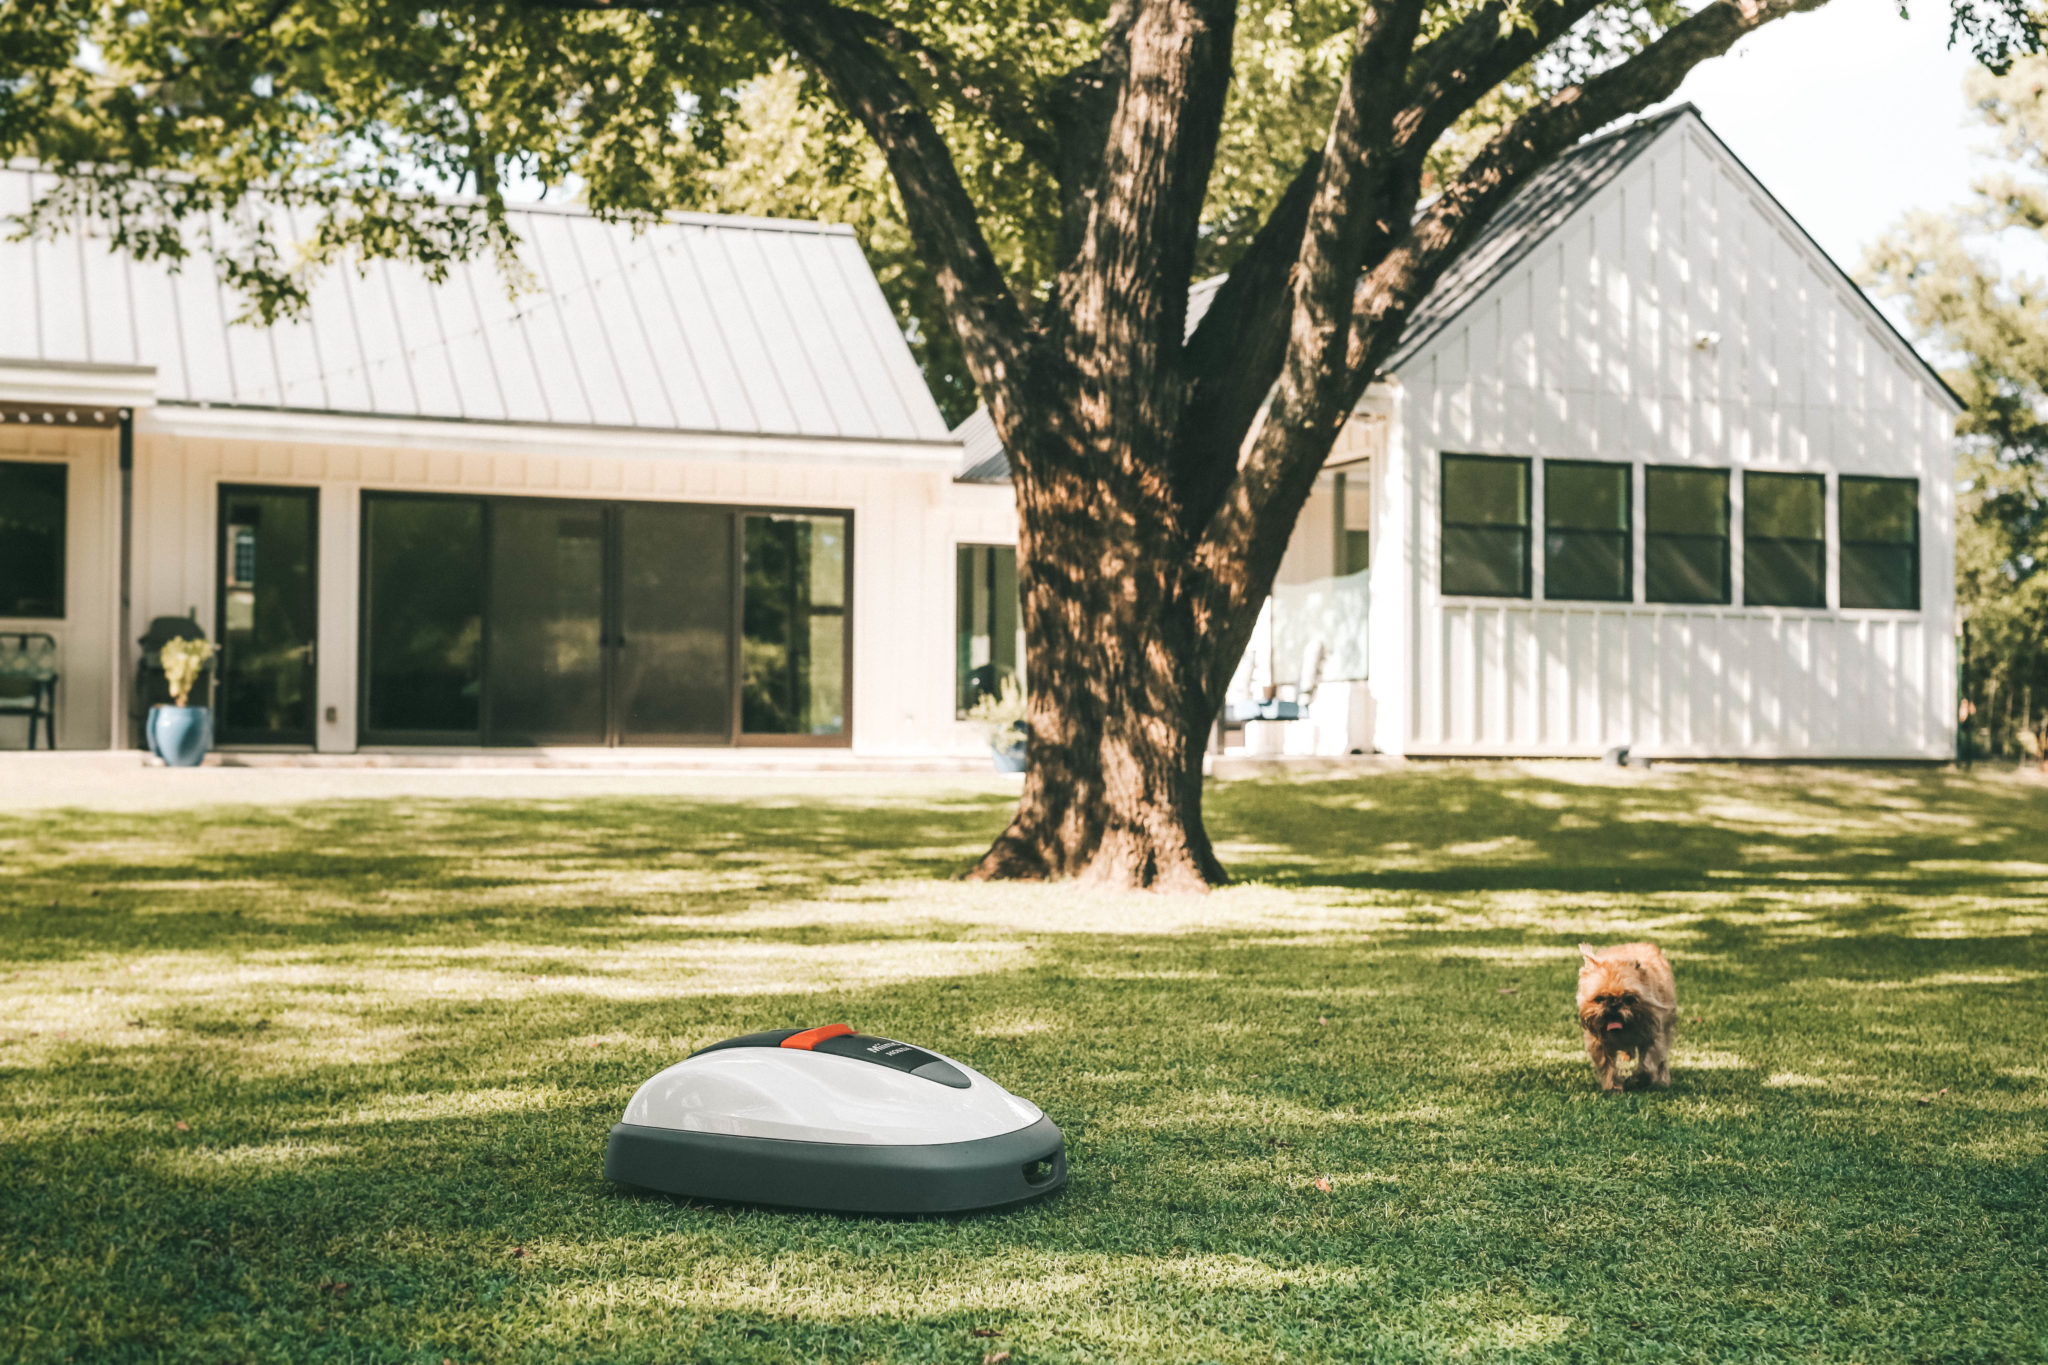 Honda Miimo Robotic Lawn Mower Review by popular Austin lifestyle blog, Dressed to Kill: image of Honda Miimo Robotic Lawn Mower.